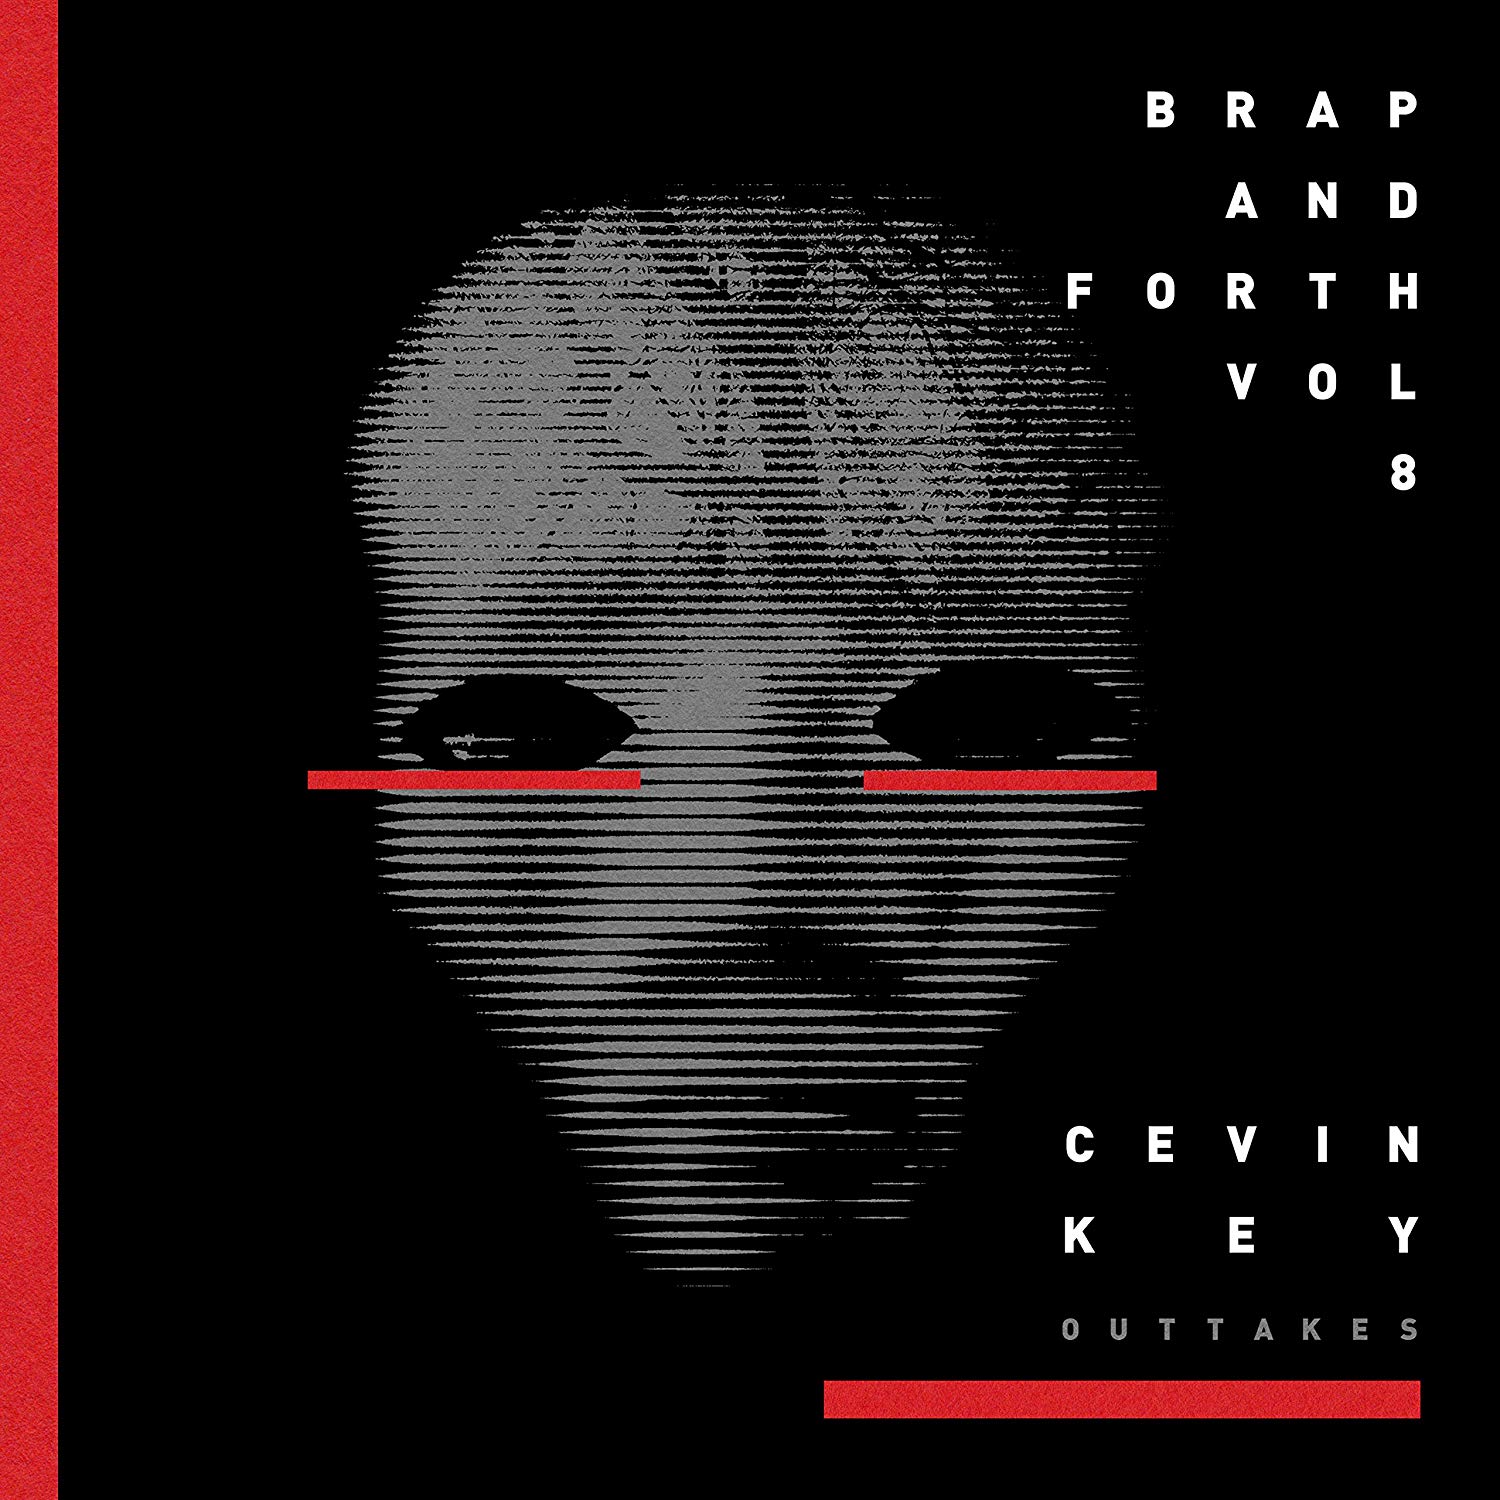 Cevin Key - Brap And Forth Volume 8 vinyl cover